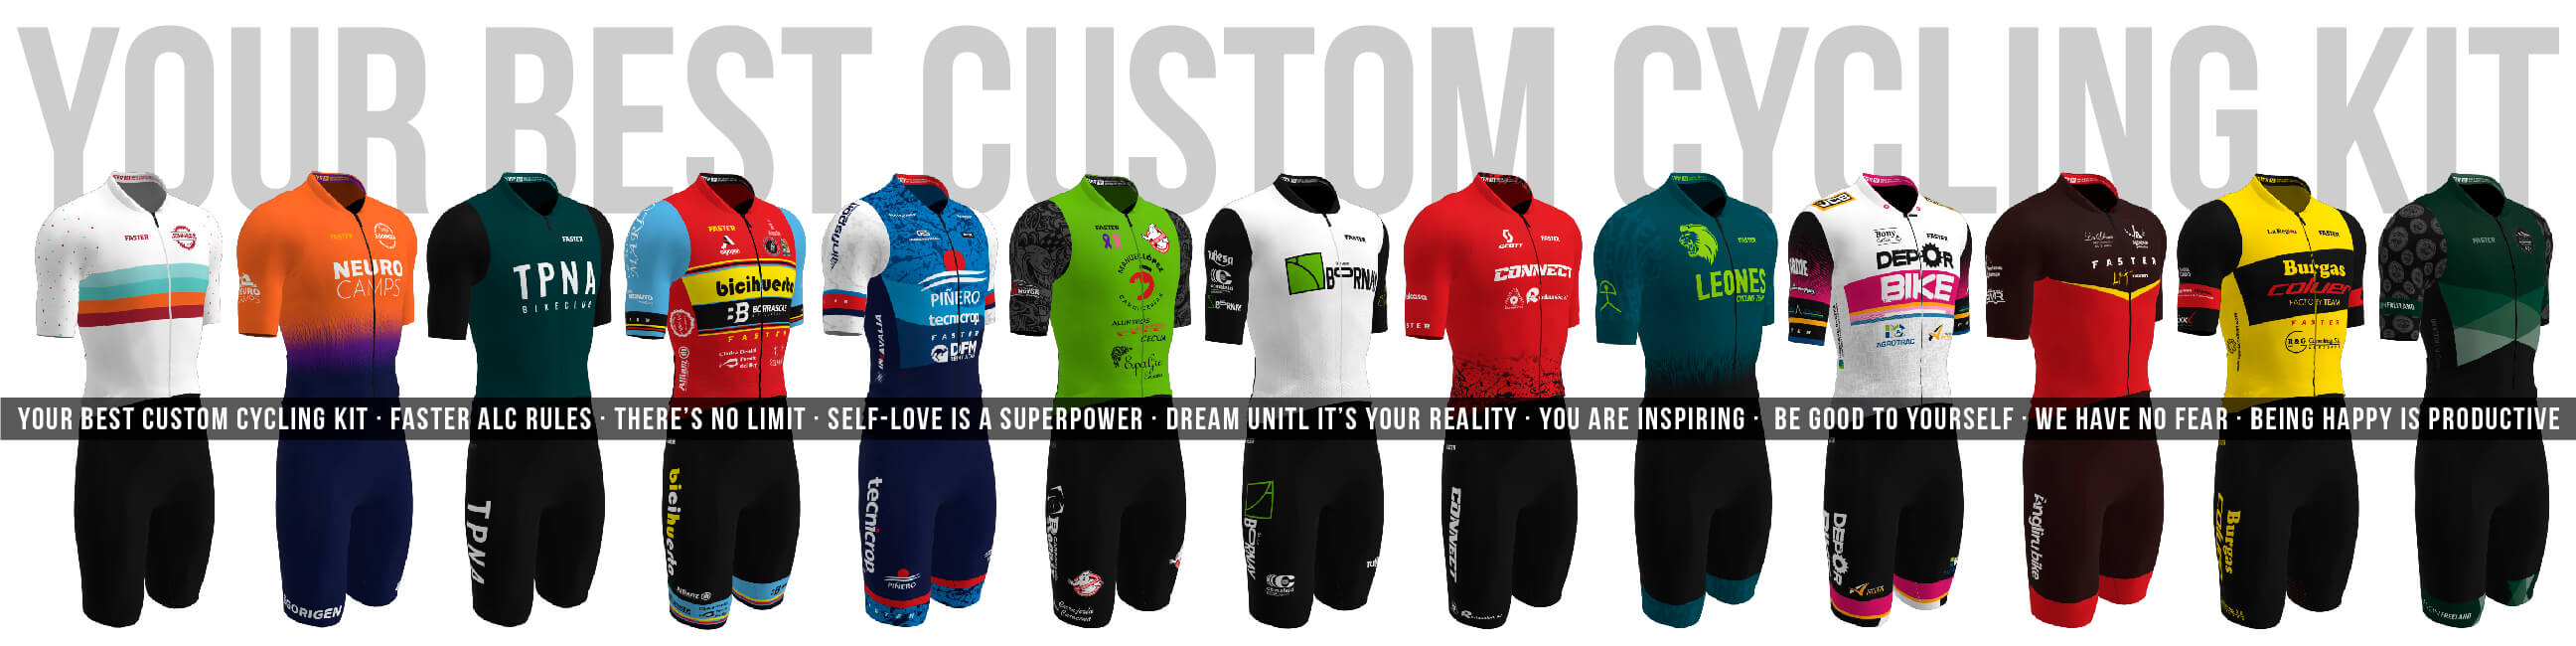 Your Best Custom Cycling Kit